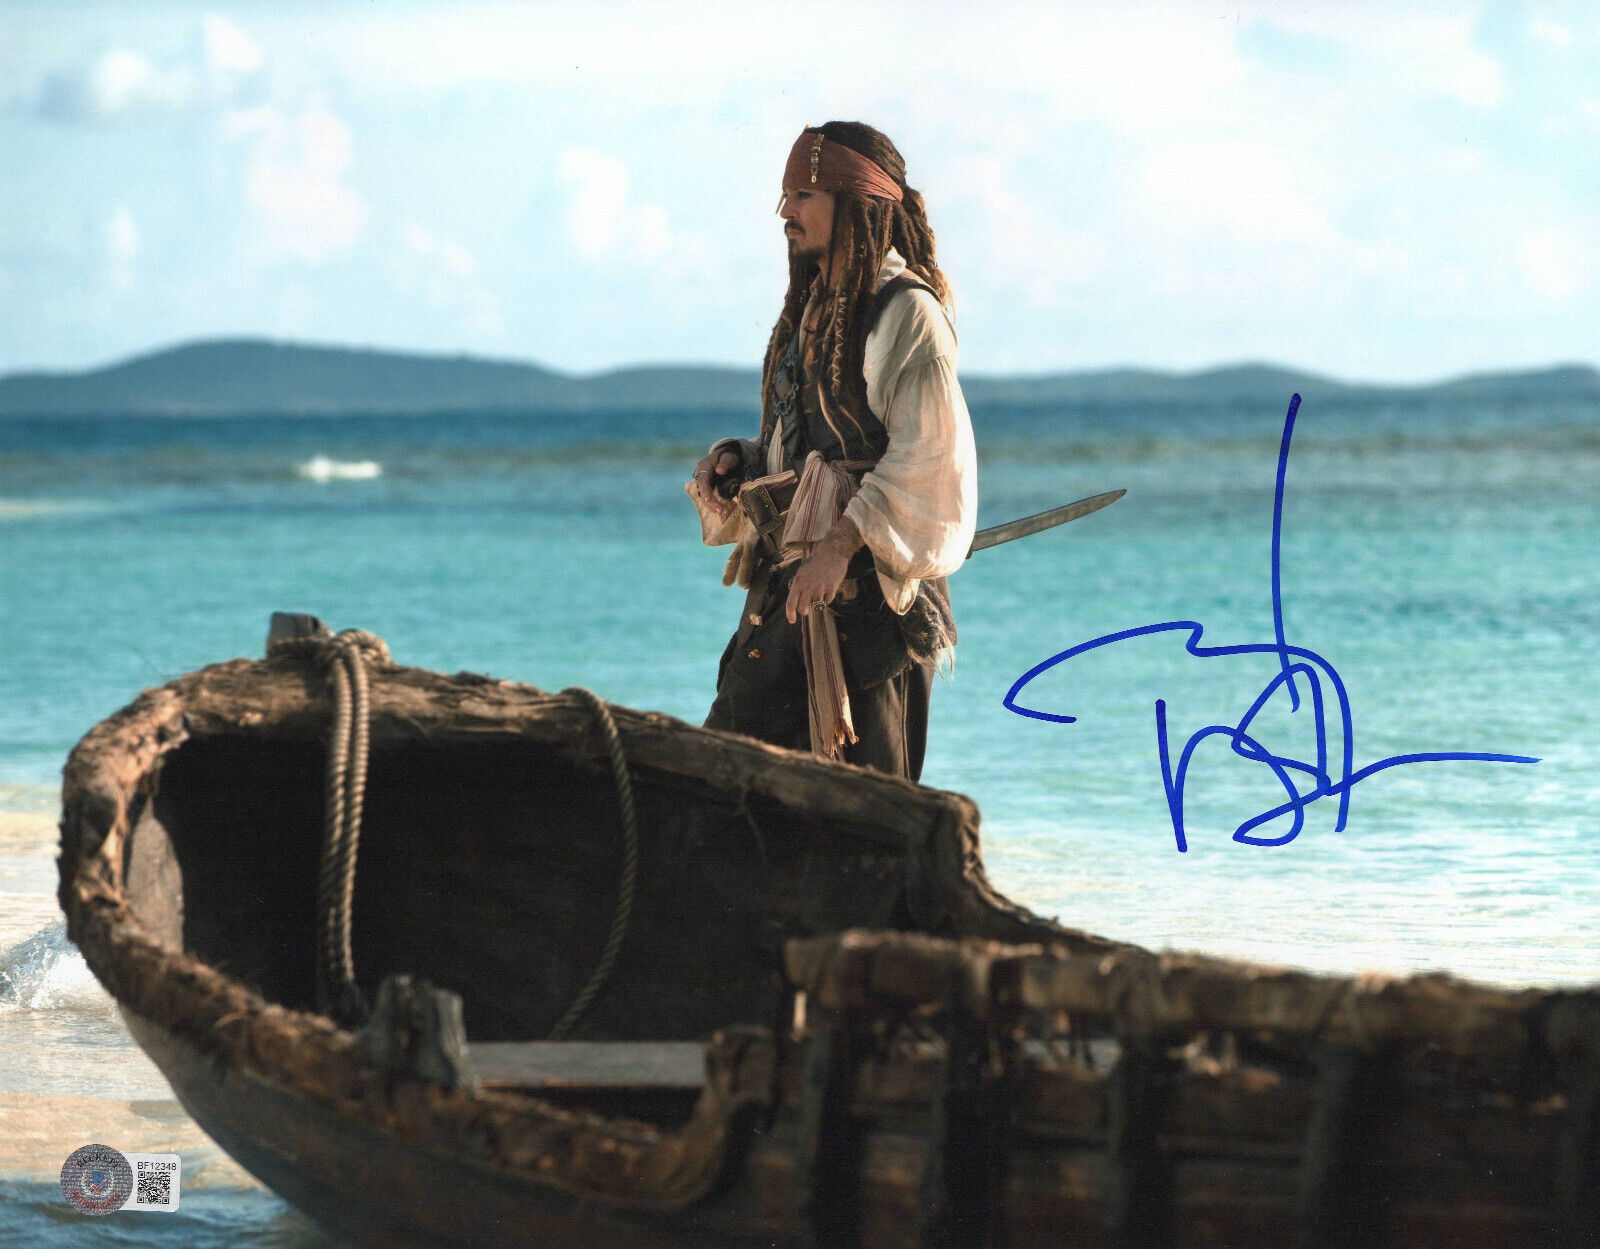 JOHNNY DEPP SIGNED 'PIRATES OF THE CARIBBEAN' 11X14 PHOTO AUTOGRAPH BECKETT